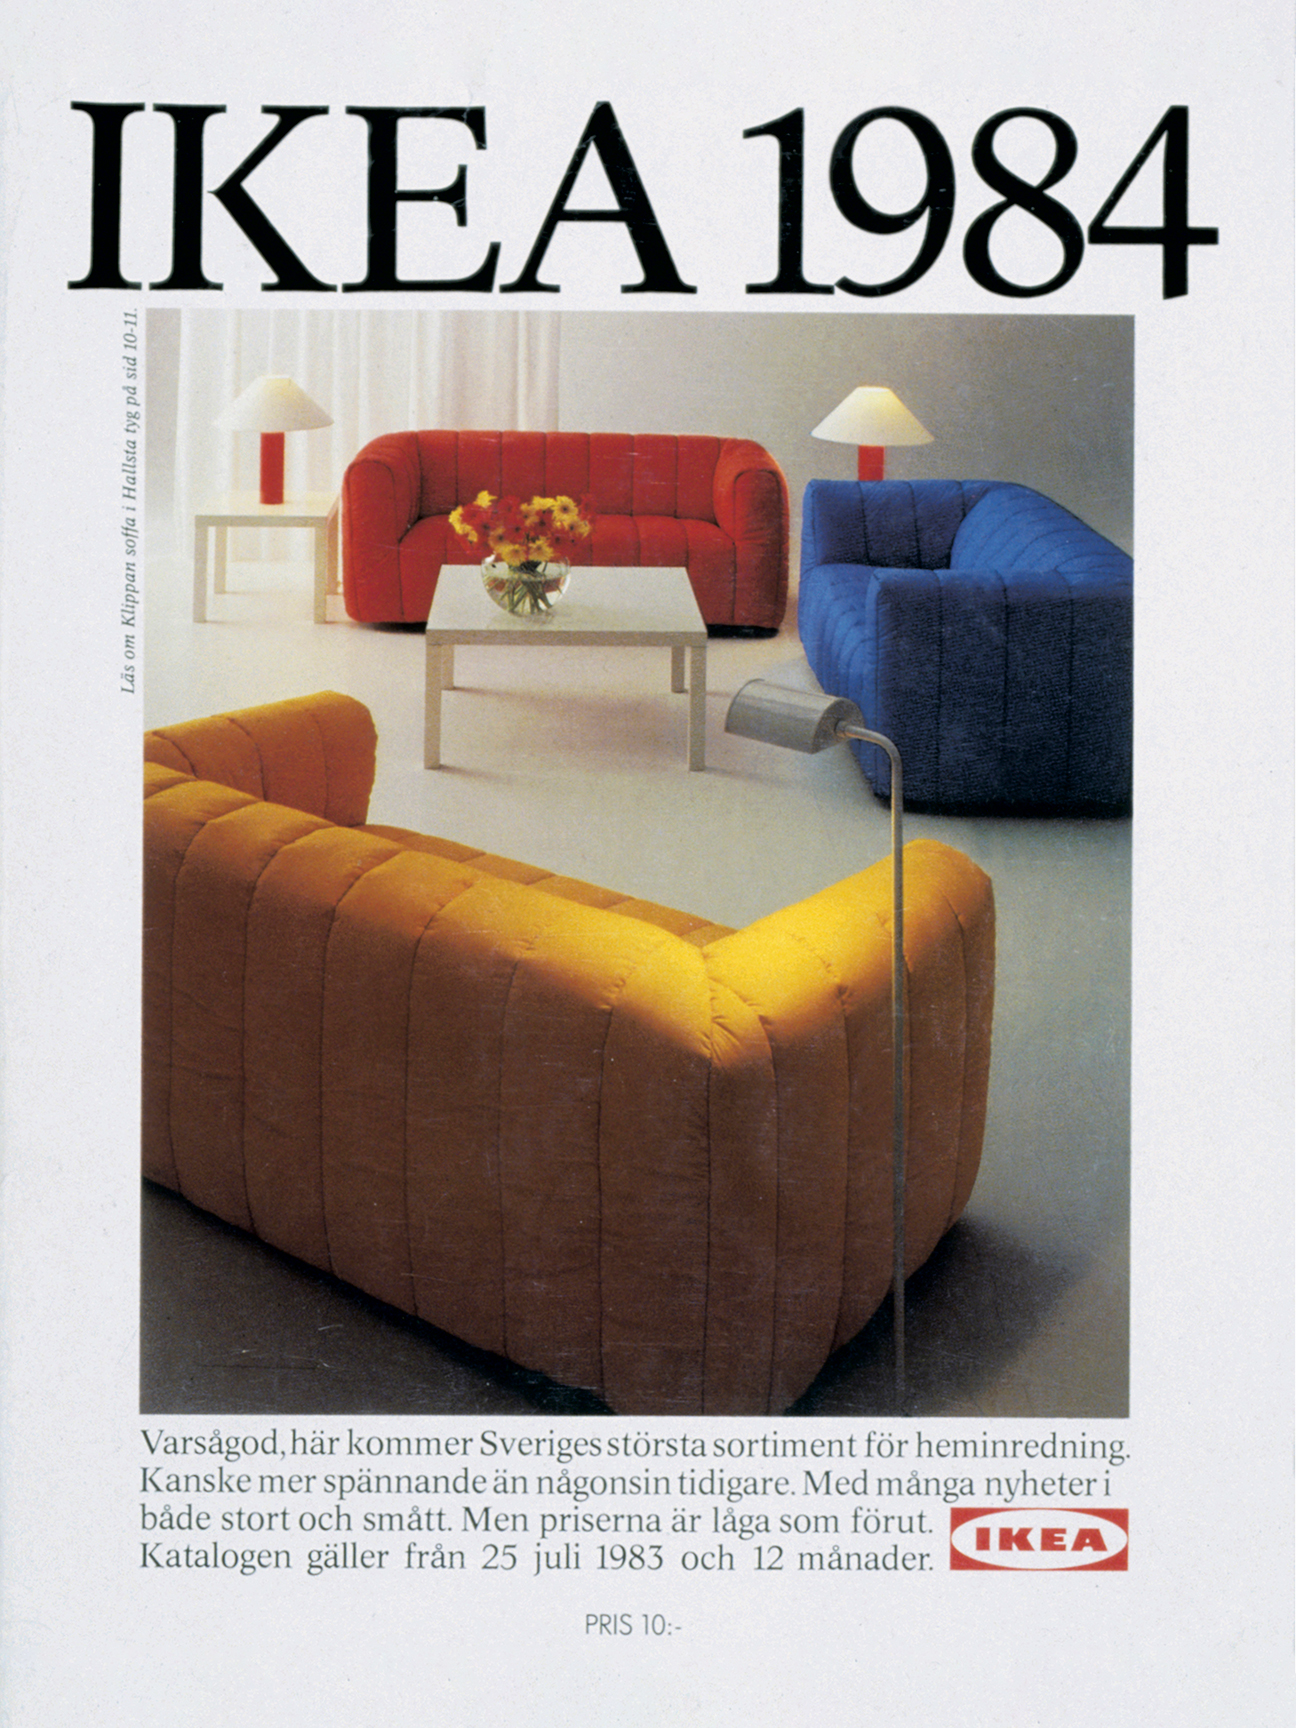 5 IKEA Catalogs We're Still Pulling Inspiration From